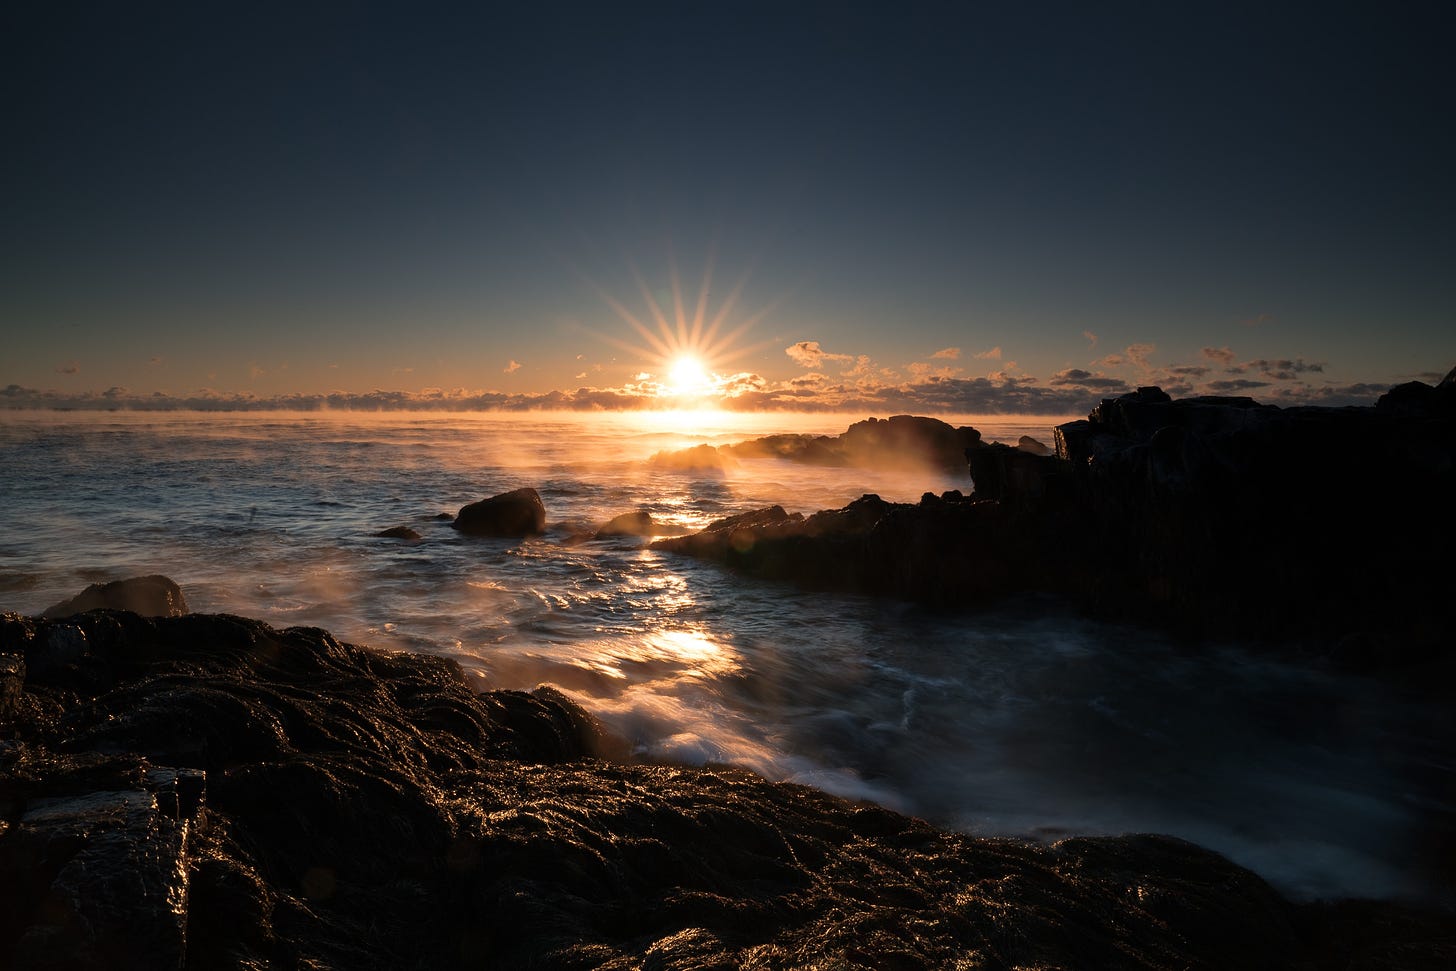 The sun rises in front of gentle waves running up against rocks.